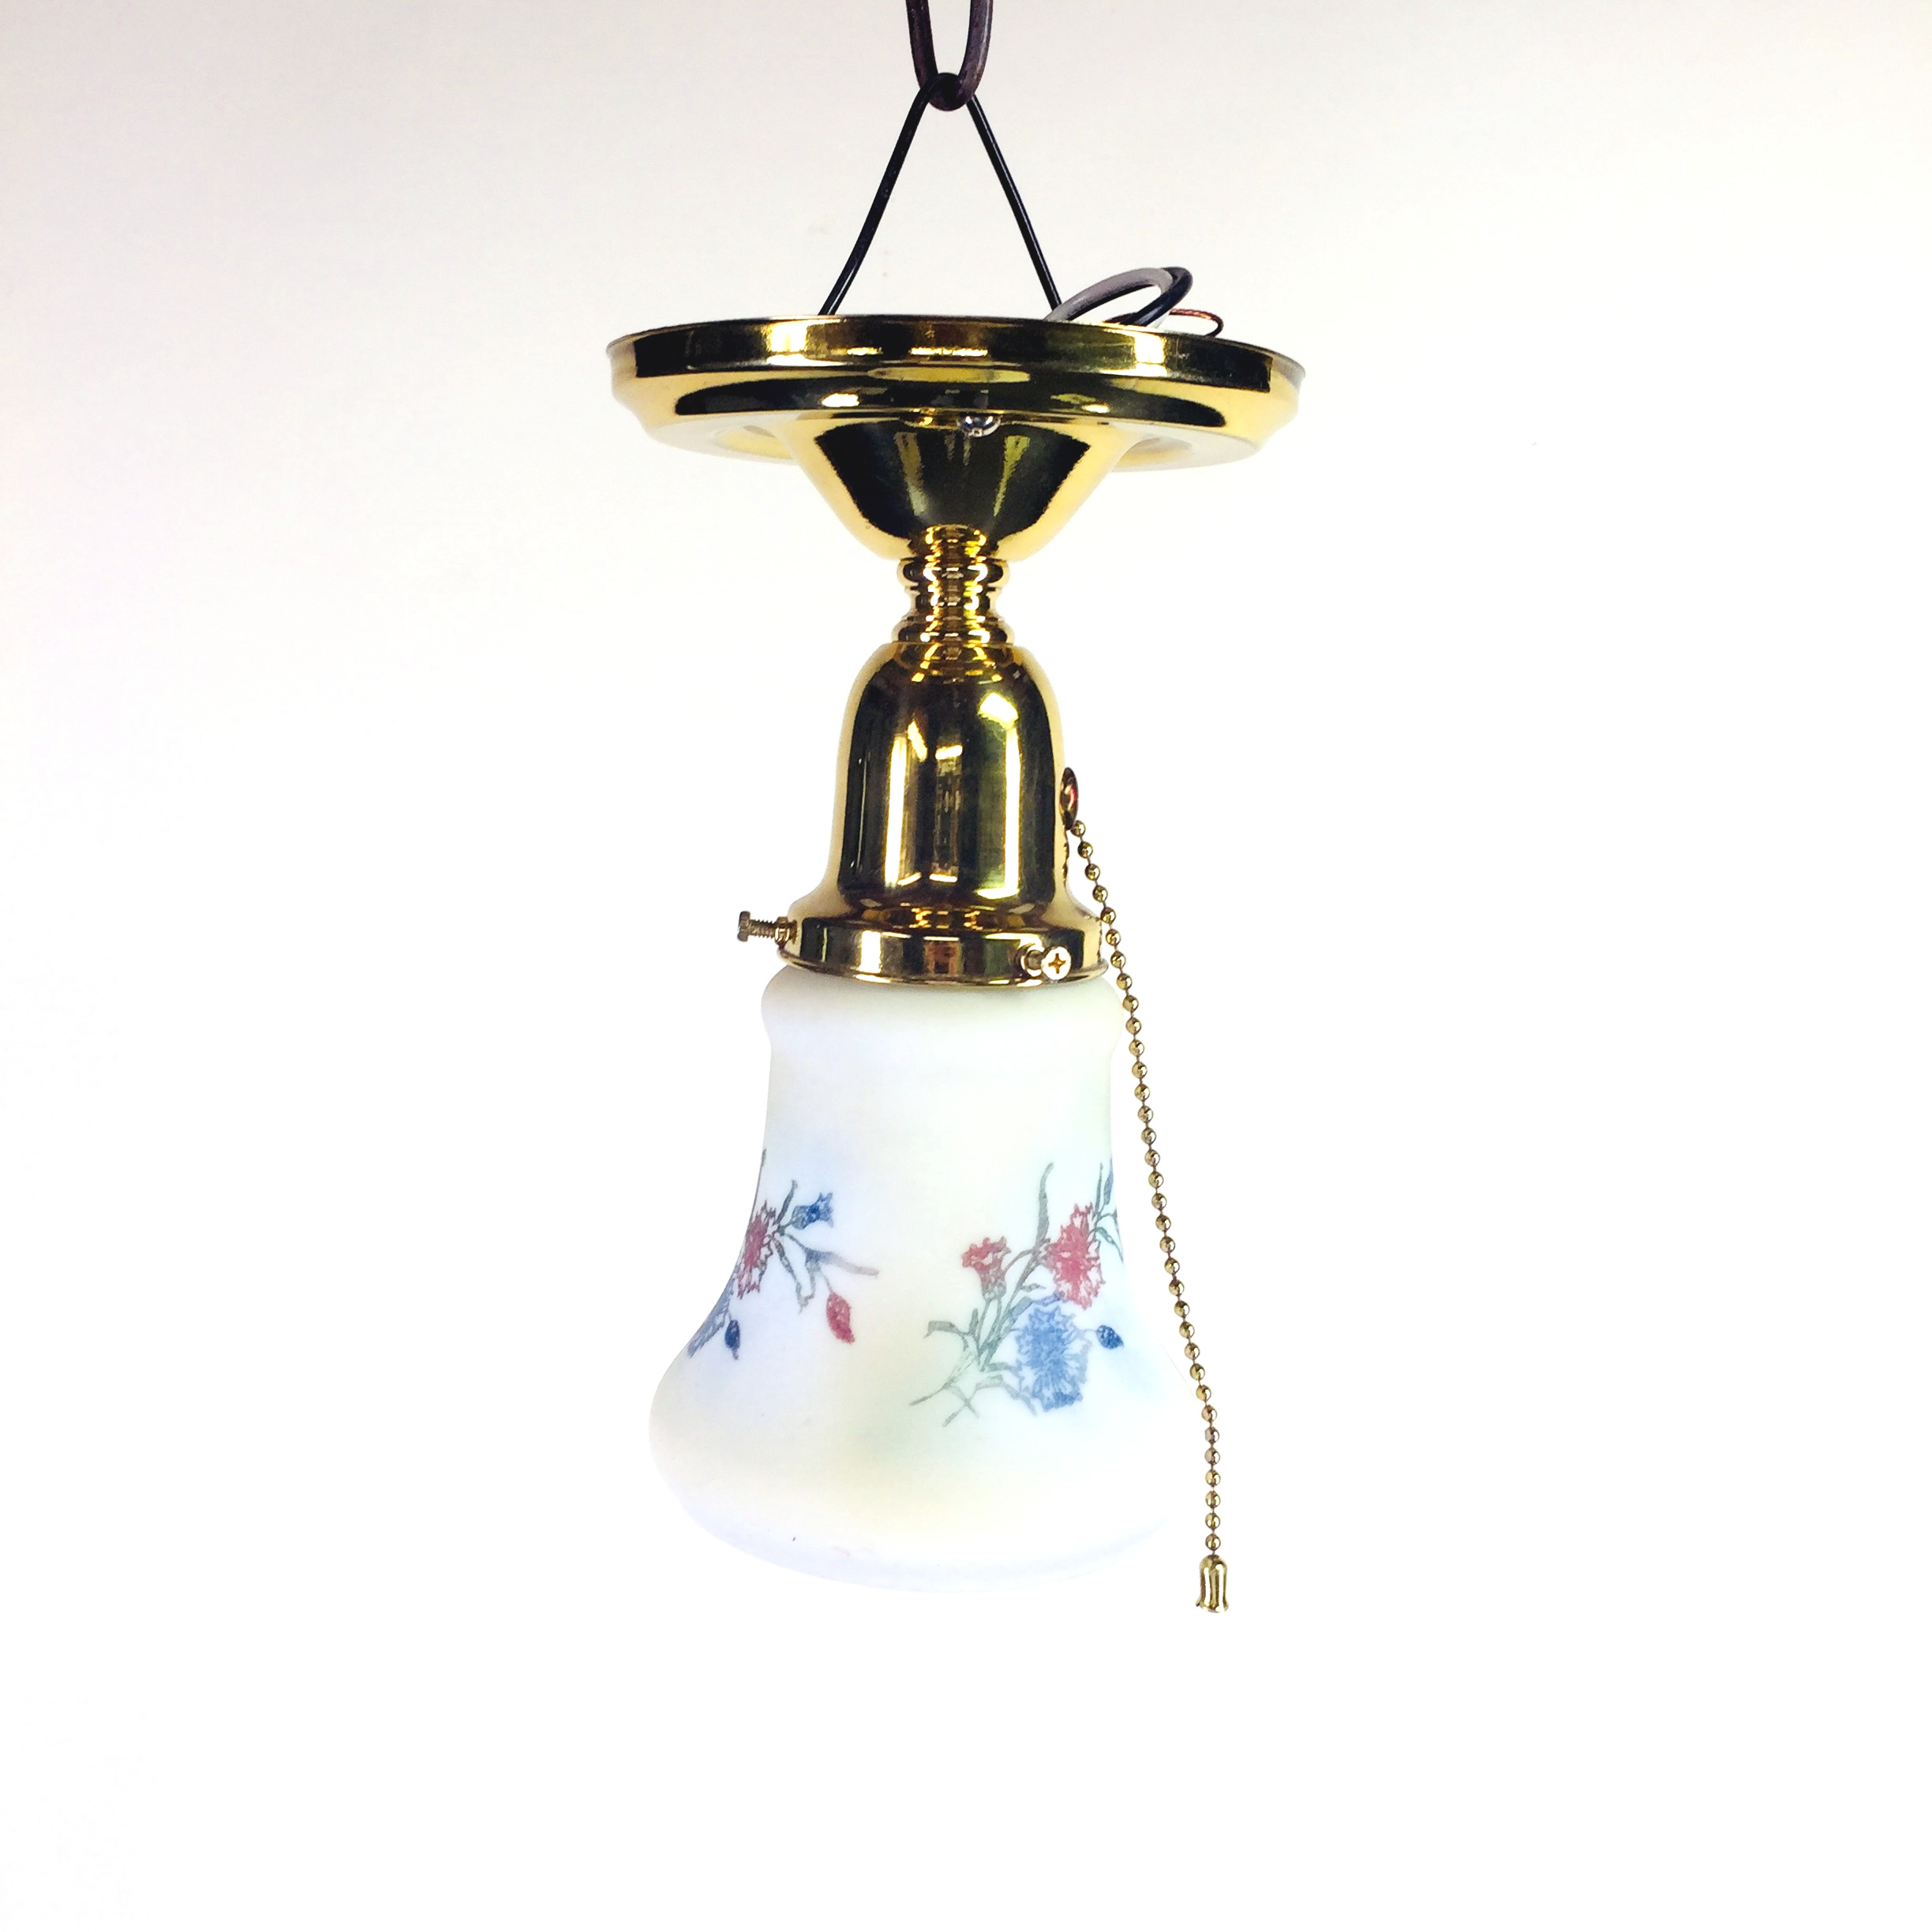 Petite brass ceiling flush mount - Old Lamps & Things, LLC